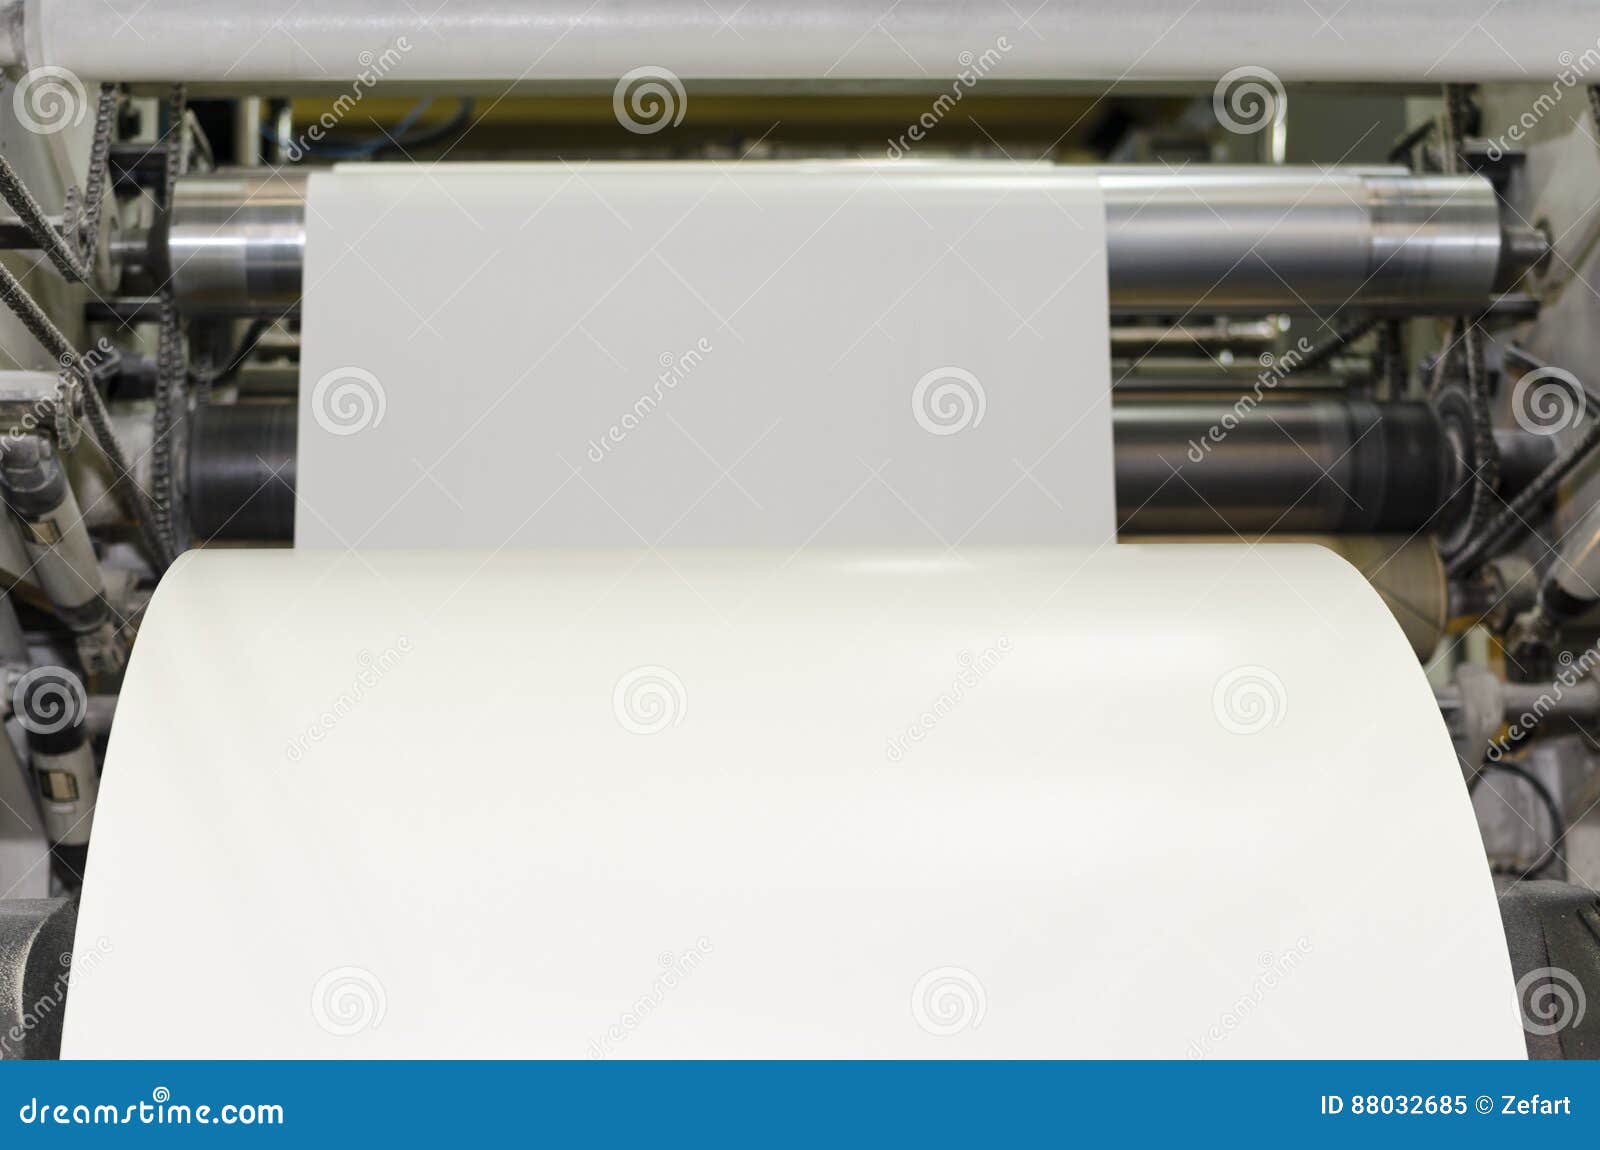 Large Paper Roll Print Machine Stock Image - Image of business,  manufacturing: 88032685